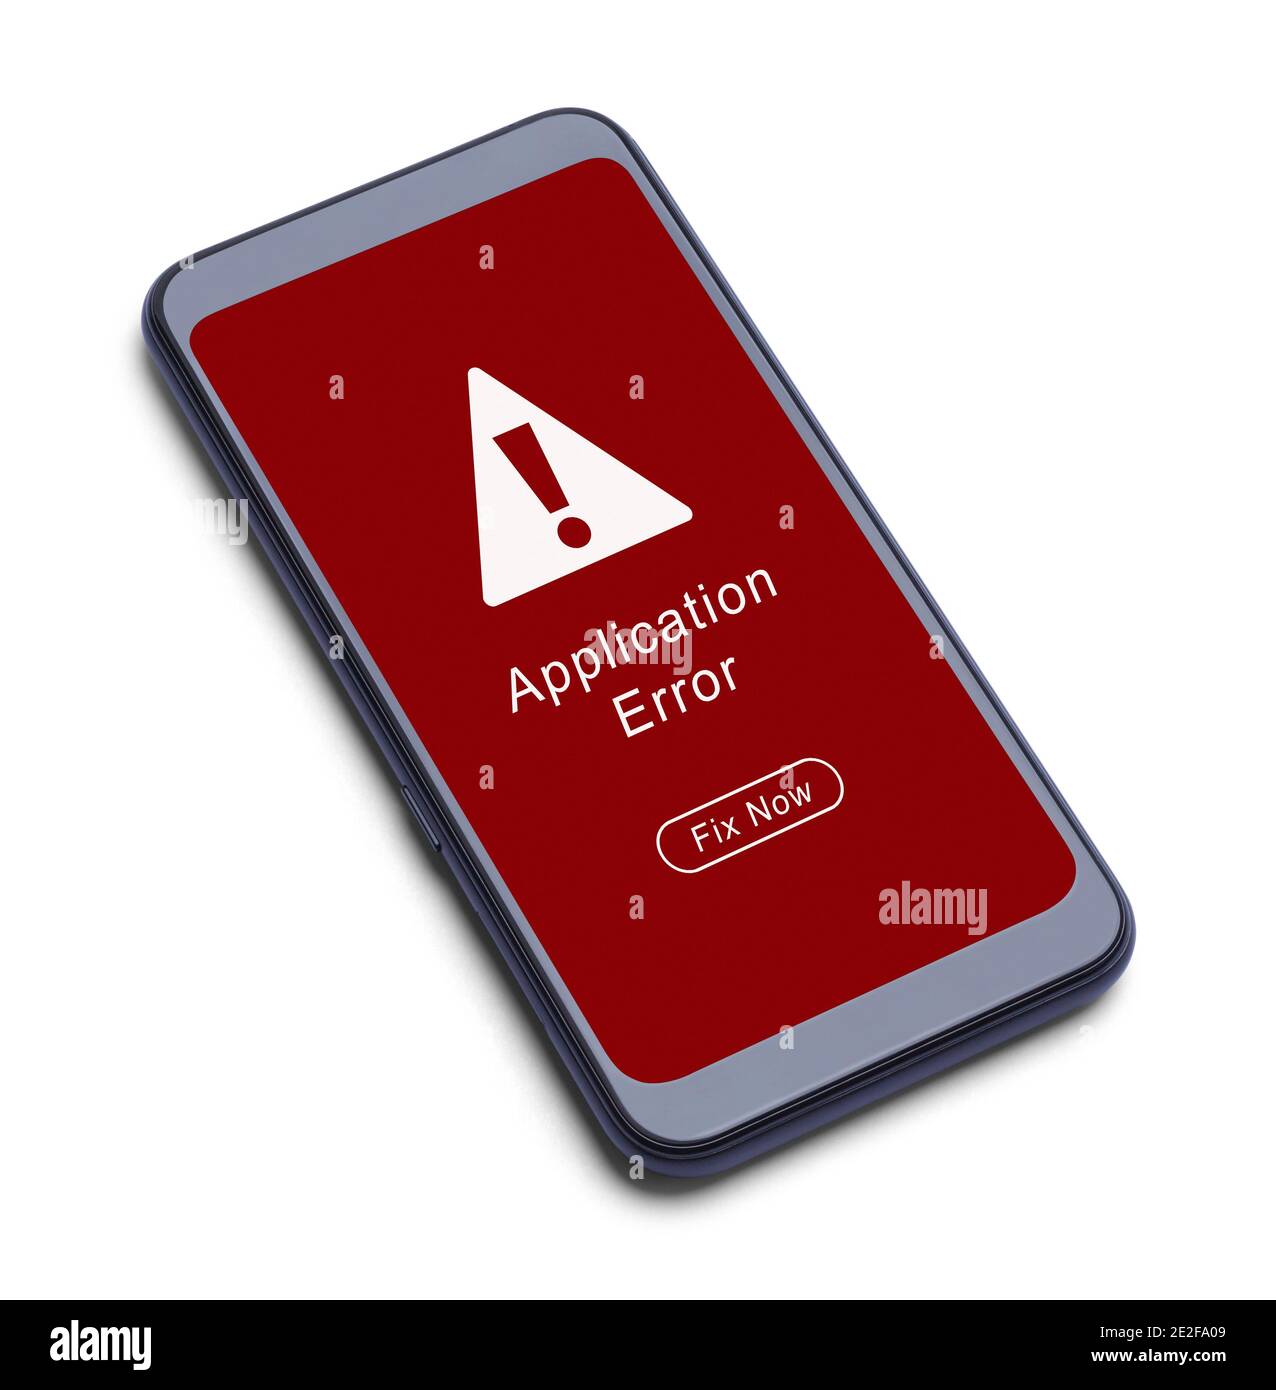 Smart Phone with a Application Error Message and Icon with Fix Now Button Cut Out on White. Stock Photo